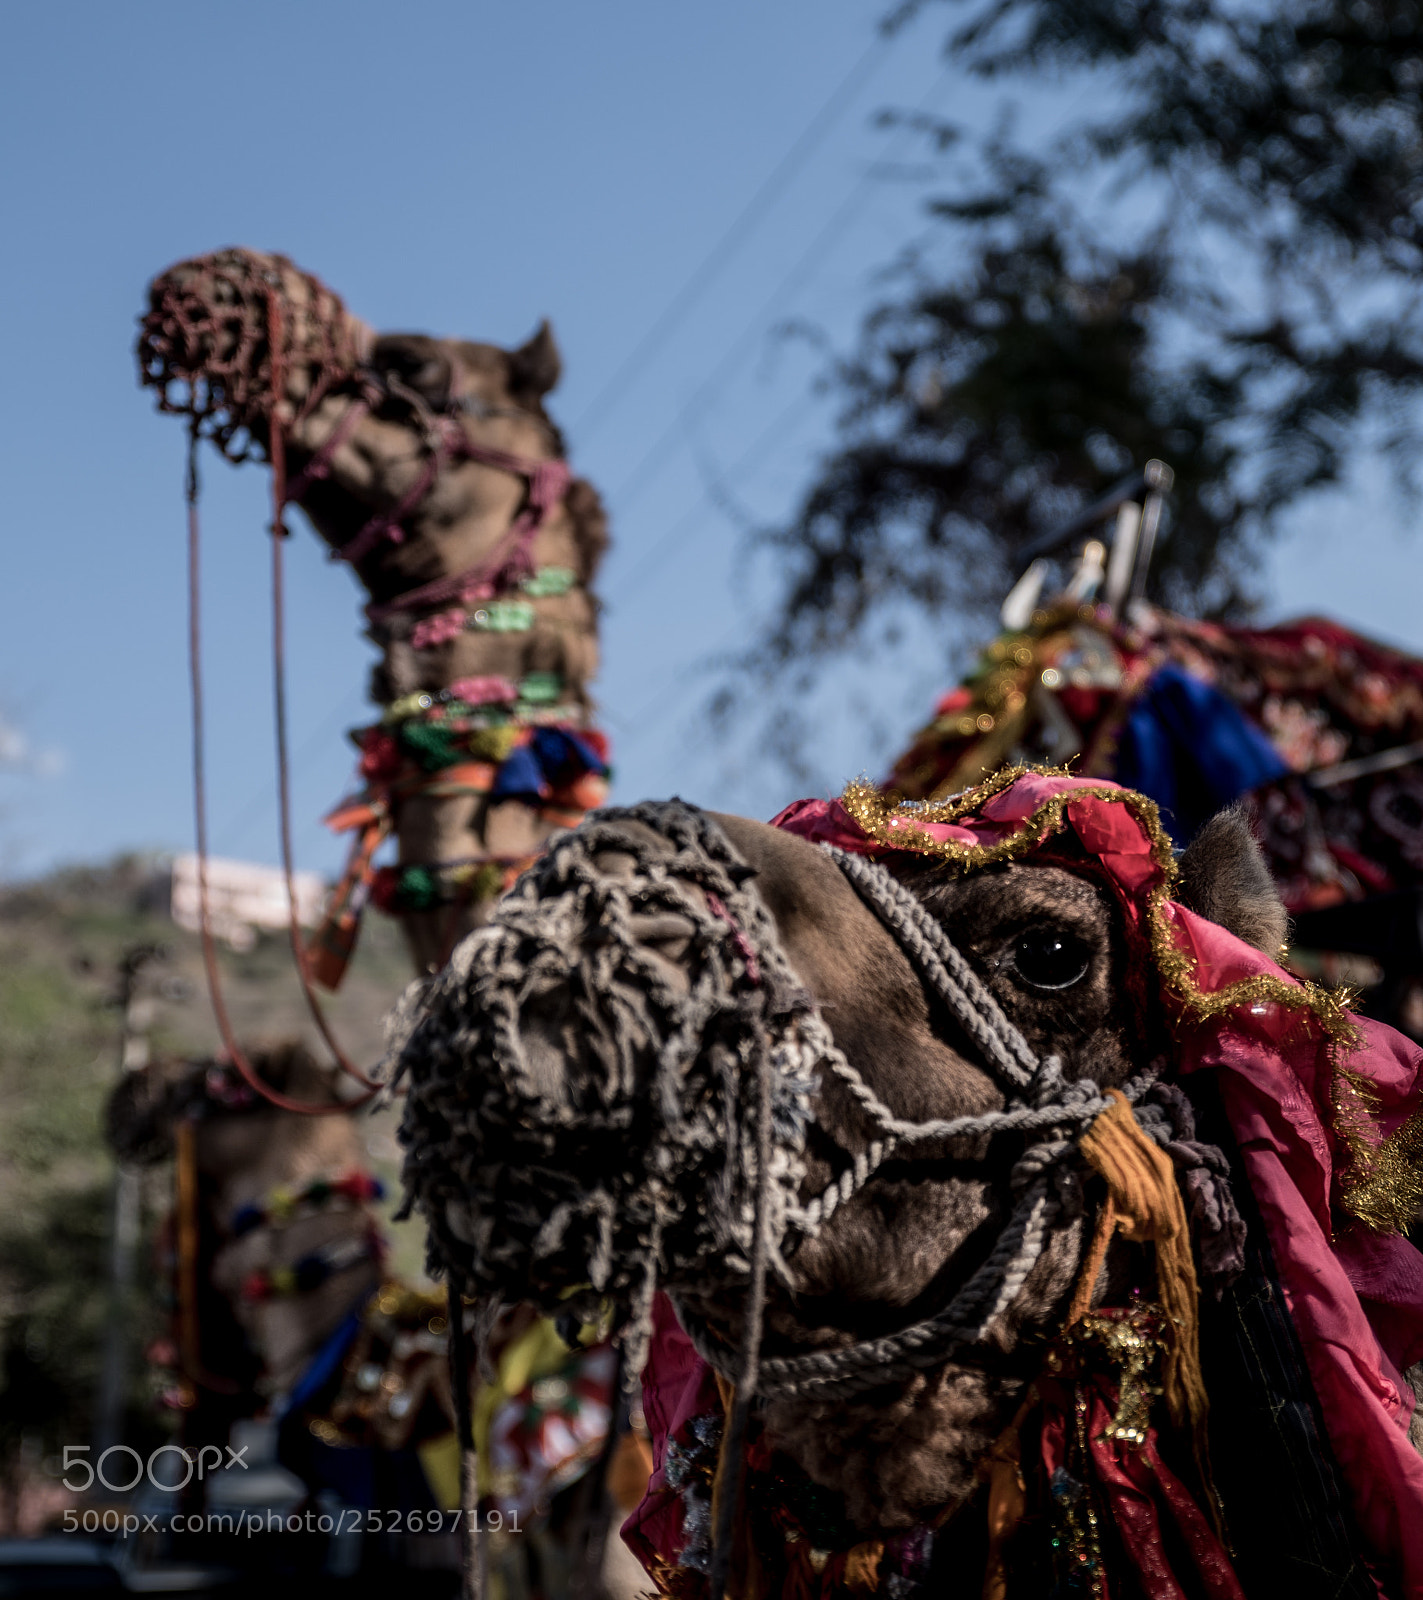 Pentax K-1 sample photo. Overdressed camels in india photography